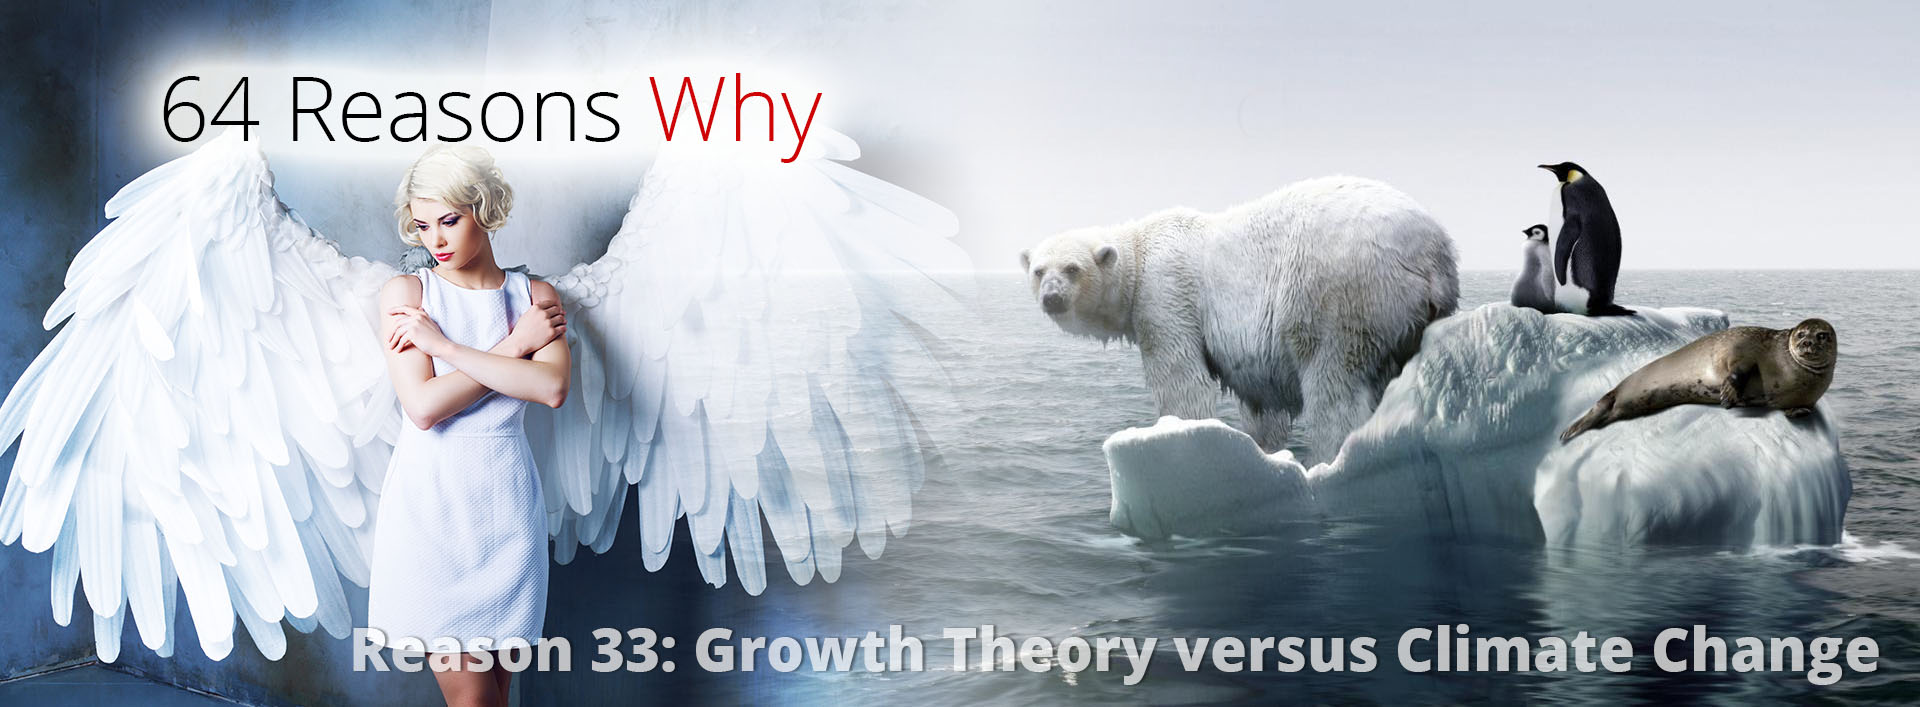 64-Reasons-Why__Reason-33__Growth-Theory-versus-Climate-Change__1.01